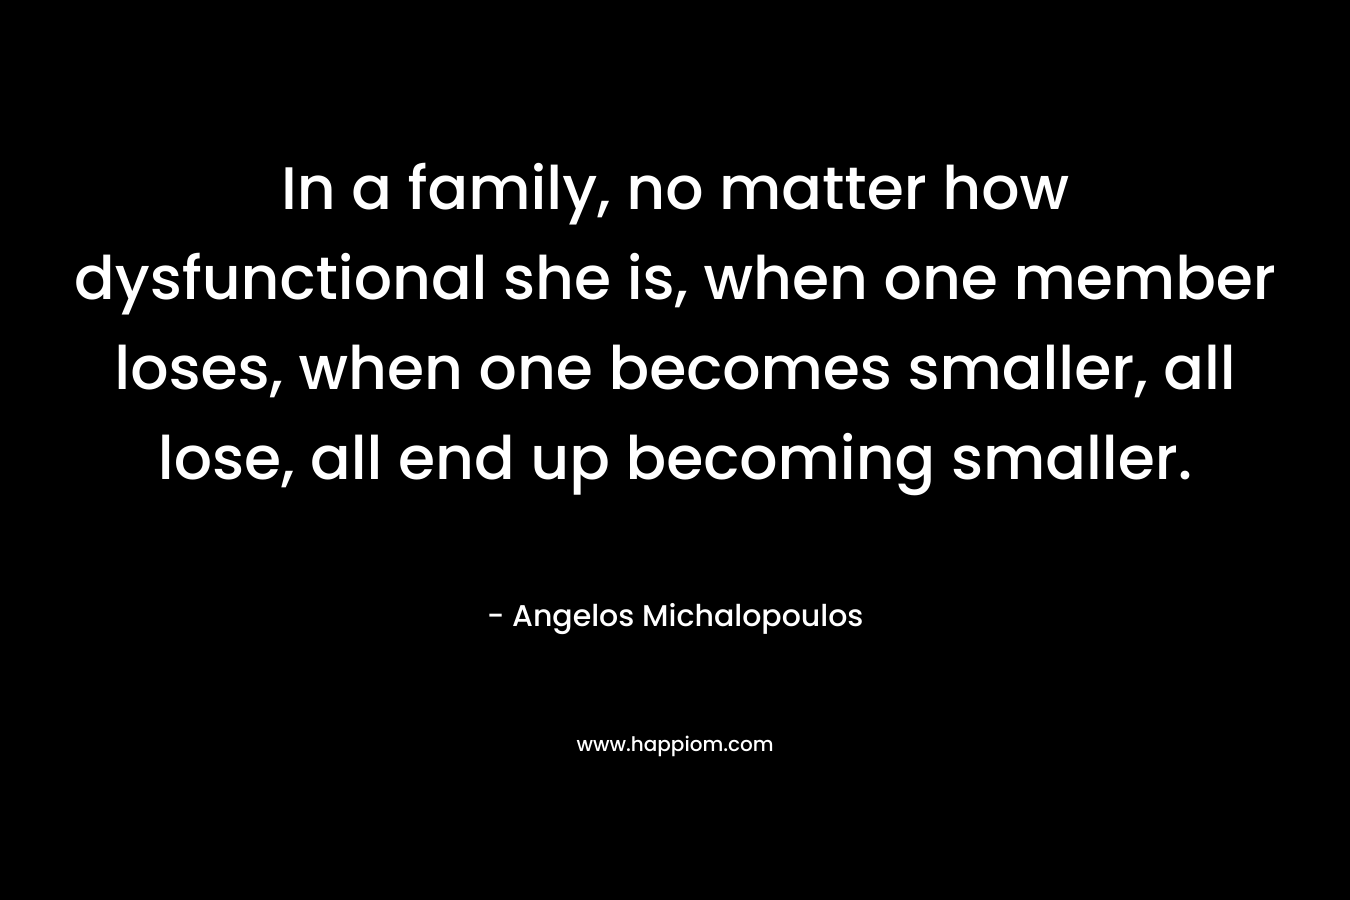 In a family, no matter how dysfunctional she is, when one member loses, when one becomes smaller, all lose, all end up becoming smaller.